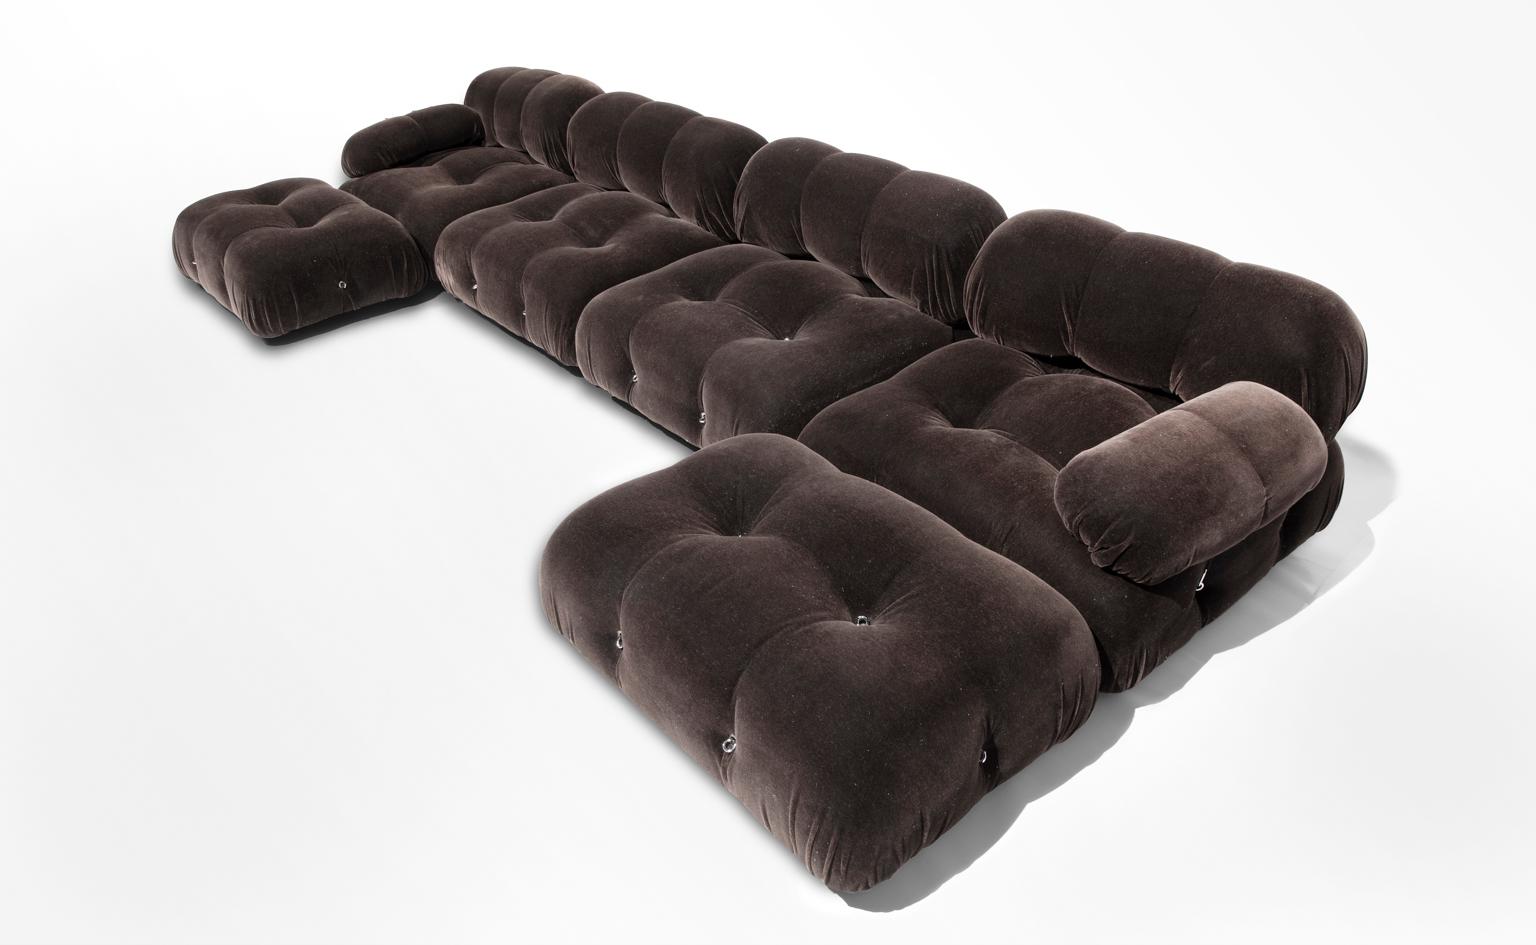 This Mario Bellini Capaleona modular sofa is extraordinary and unique in that it is original with the hallmark rich dark brown Mid-Century Modern color, luschious dense fabric and comforting, yet supportive construction. Unlike current Capaleona